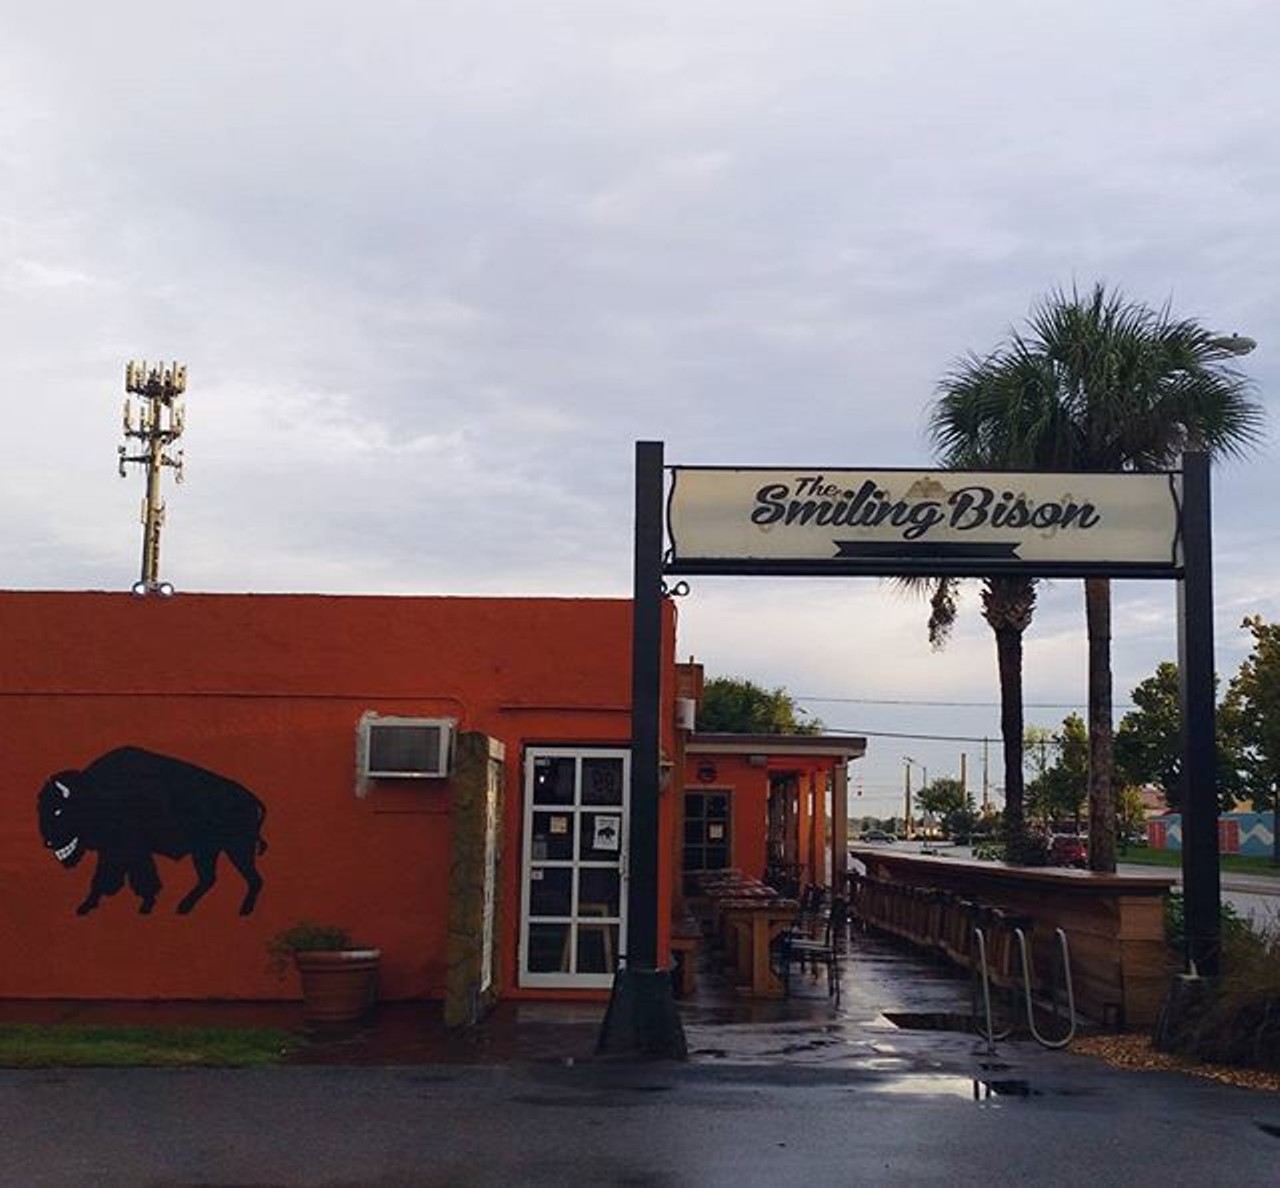 Smiling Bison
745 Bennett Rd, Orlando
407-898-8580
Enjoy gastronomic delights and craft beers on the Smiling Bison's patio.  Image via gennadac on Instagram.